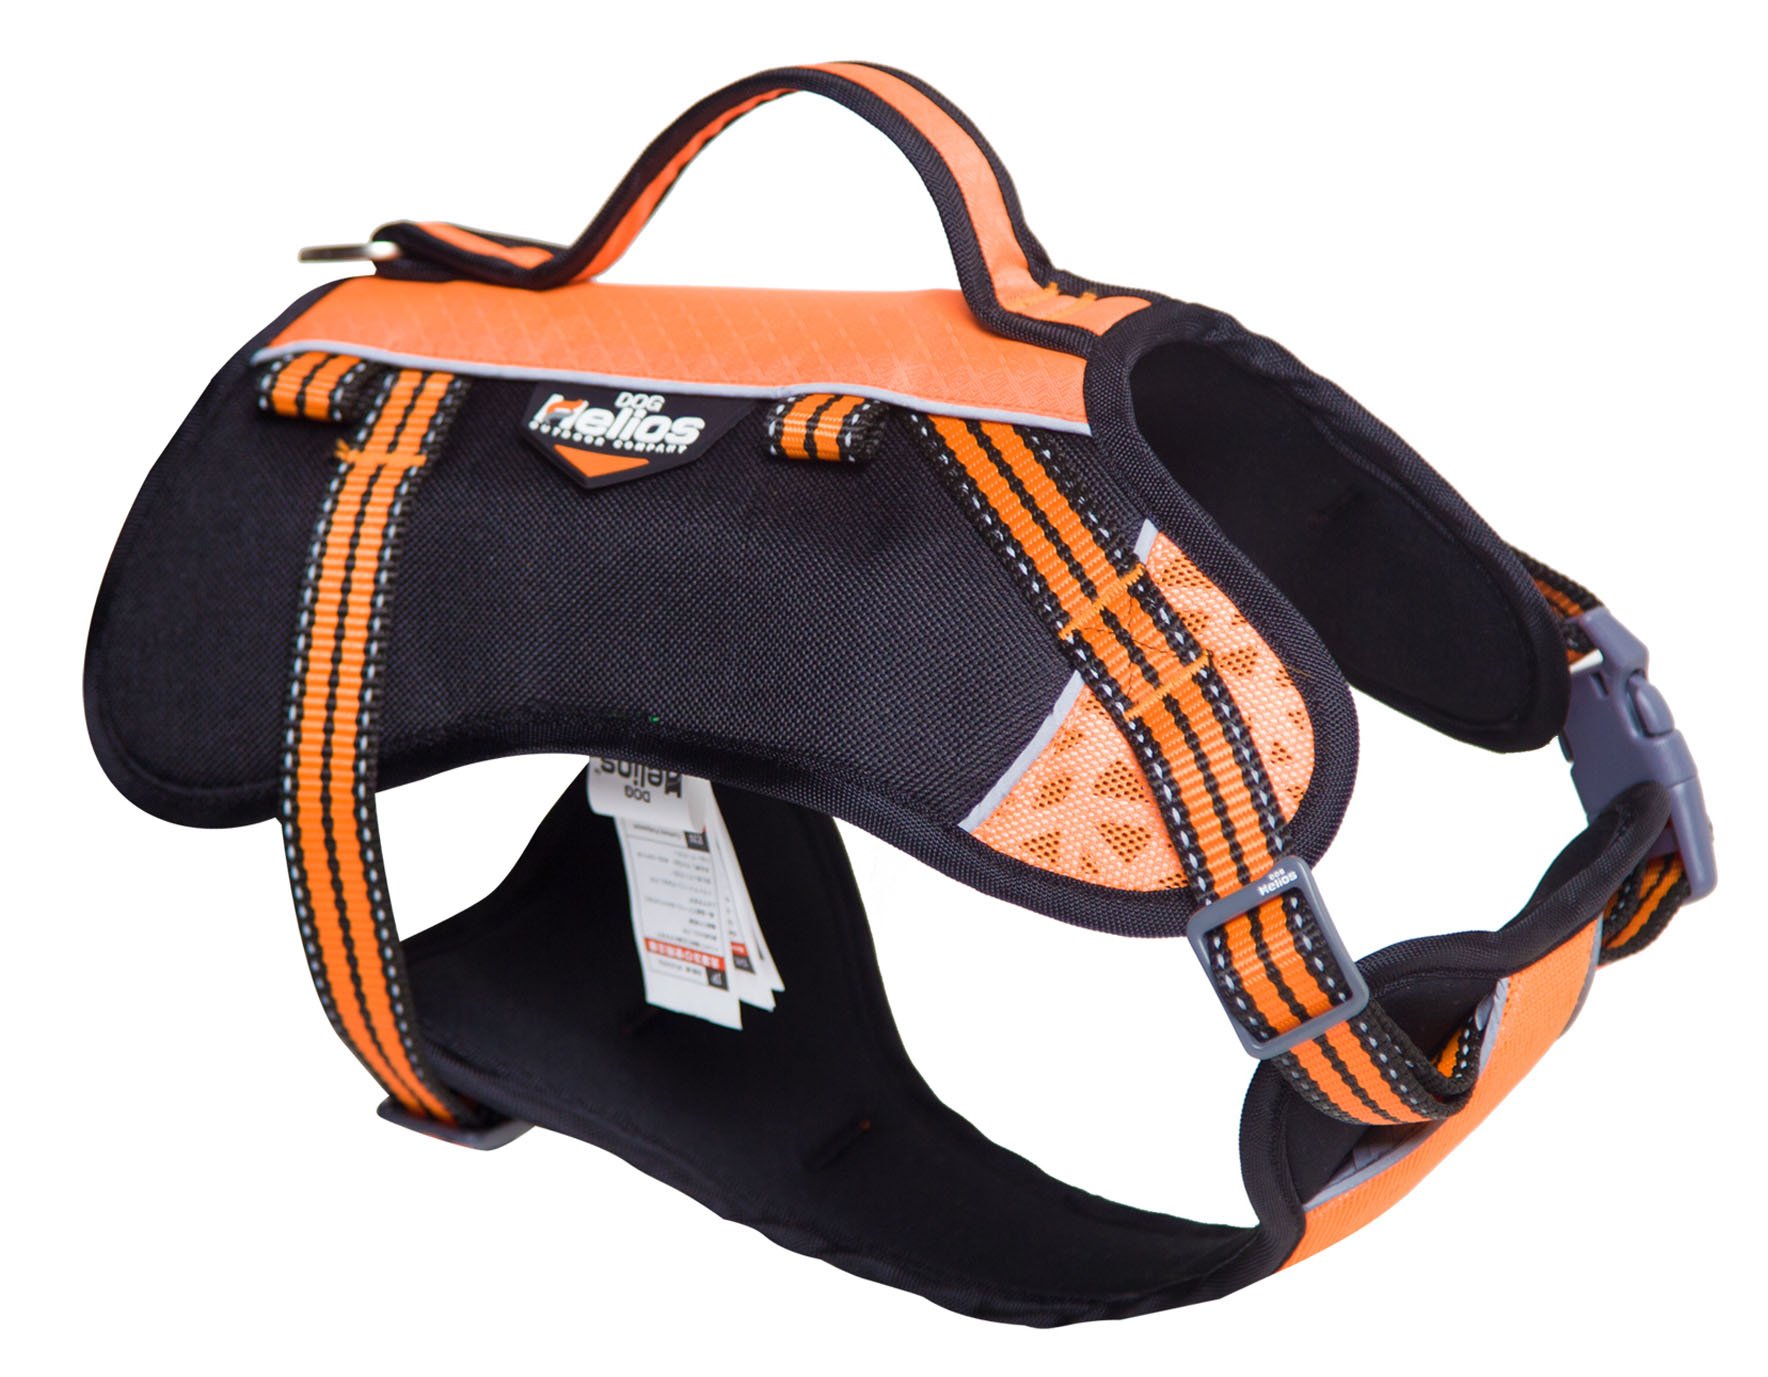 Helios Freestyle 3-in-1 Explorer Convertible Backpack, Harness and Leash - image 3 of 5